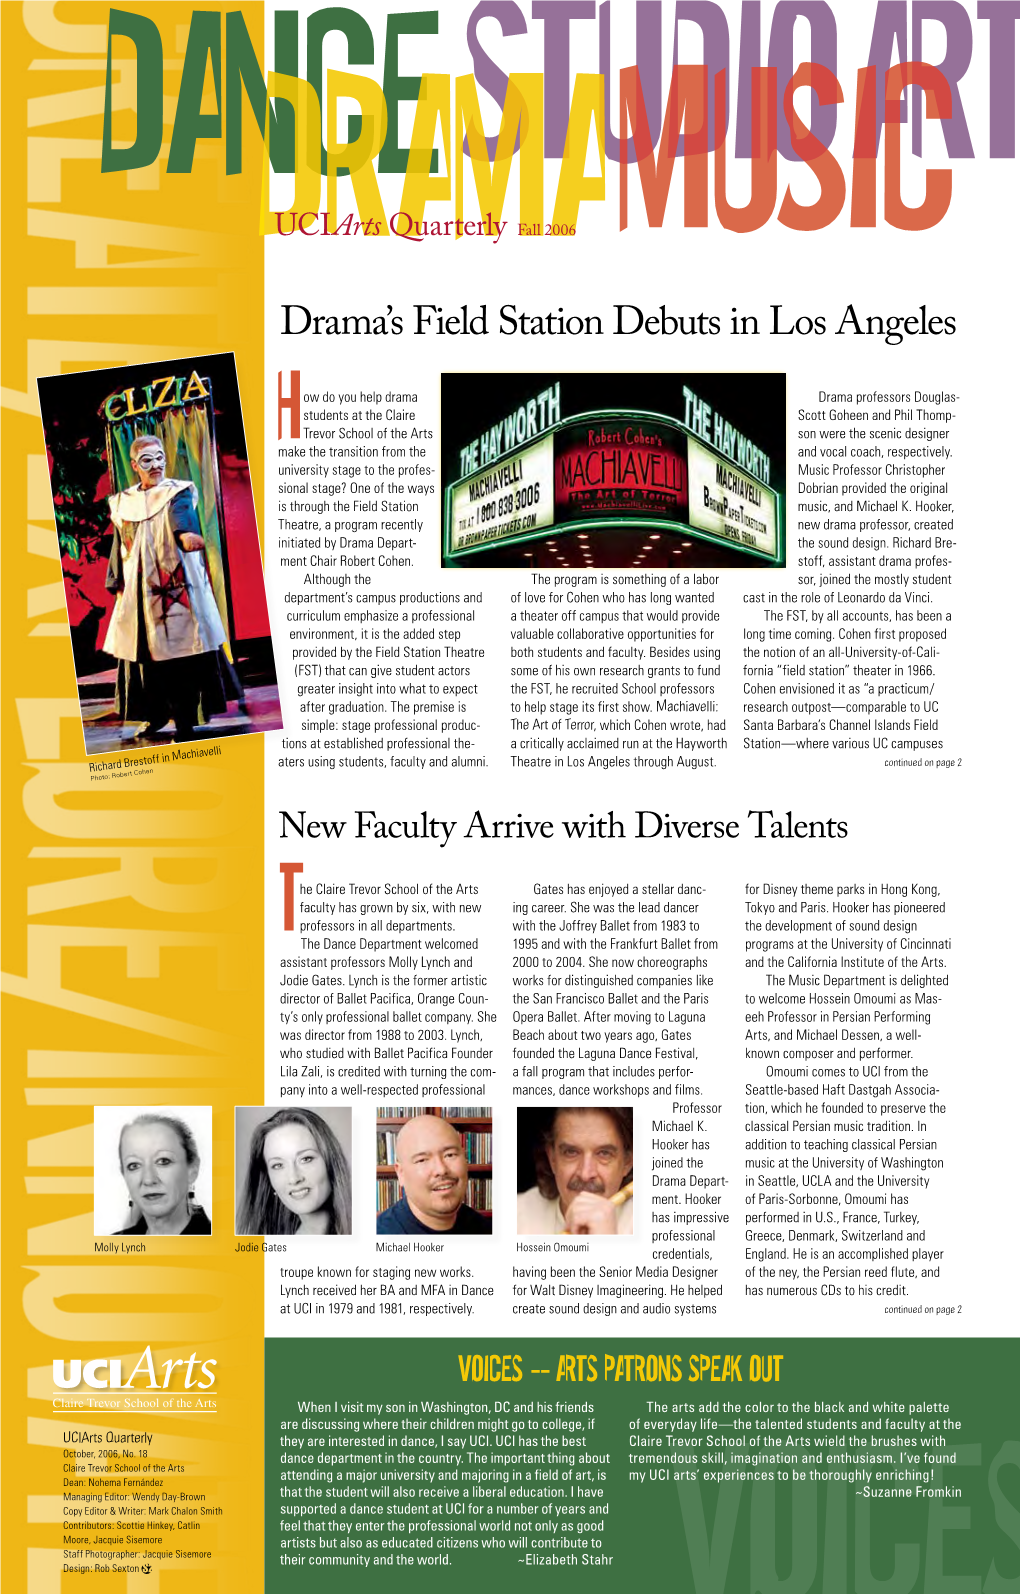 Drama's Field Station Debuts in Los Angeles